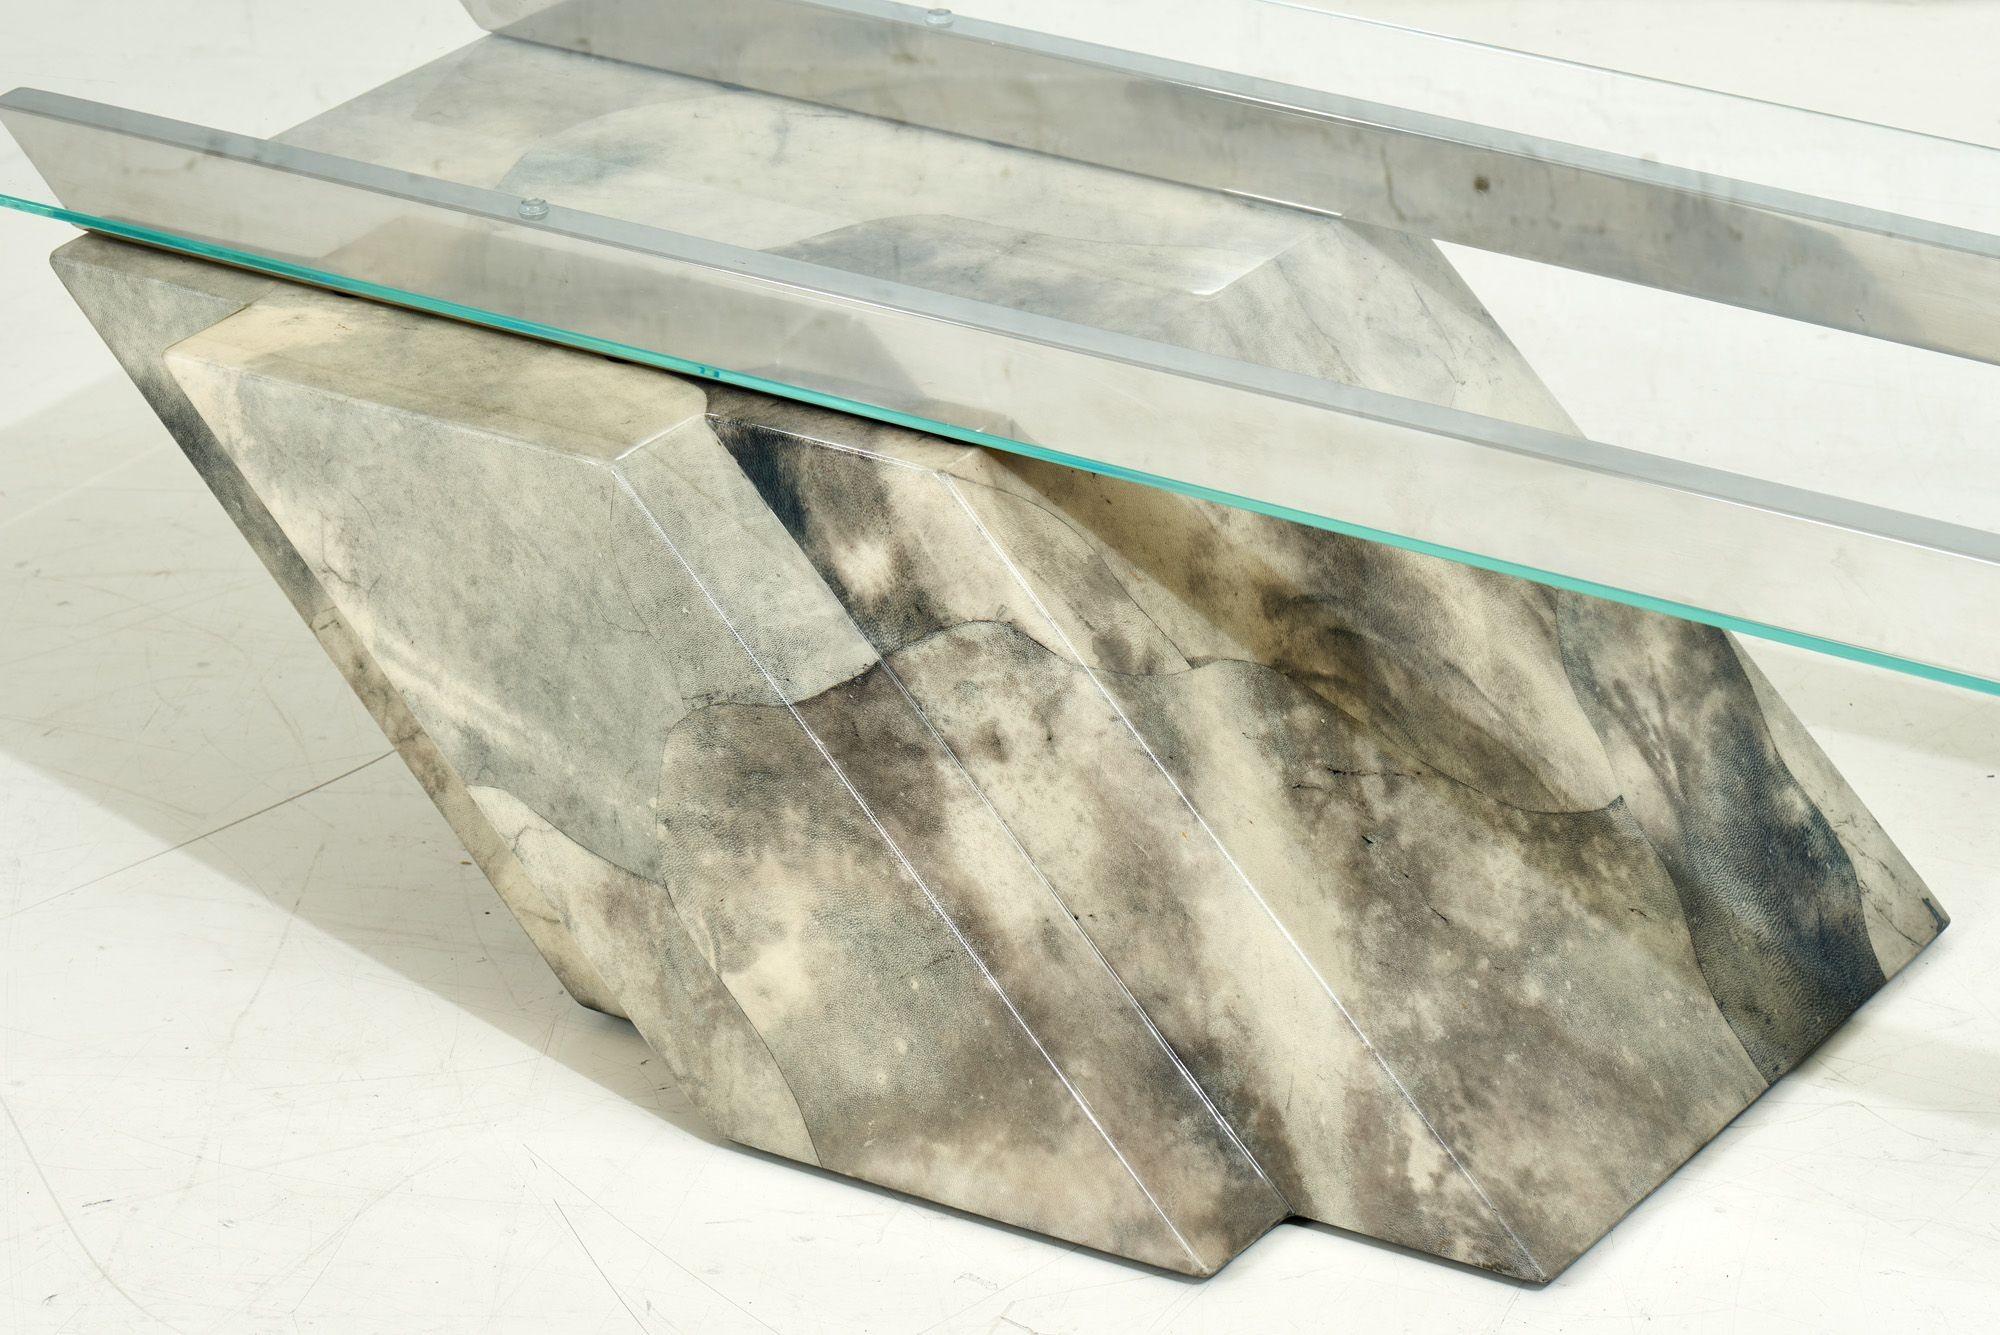 Goatskin Cantilevered Stainless Steel and Glass Coffee Table, 1970 For Sale 1